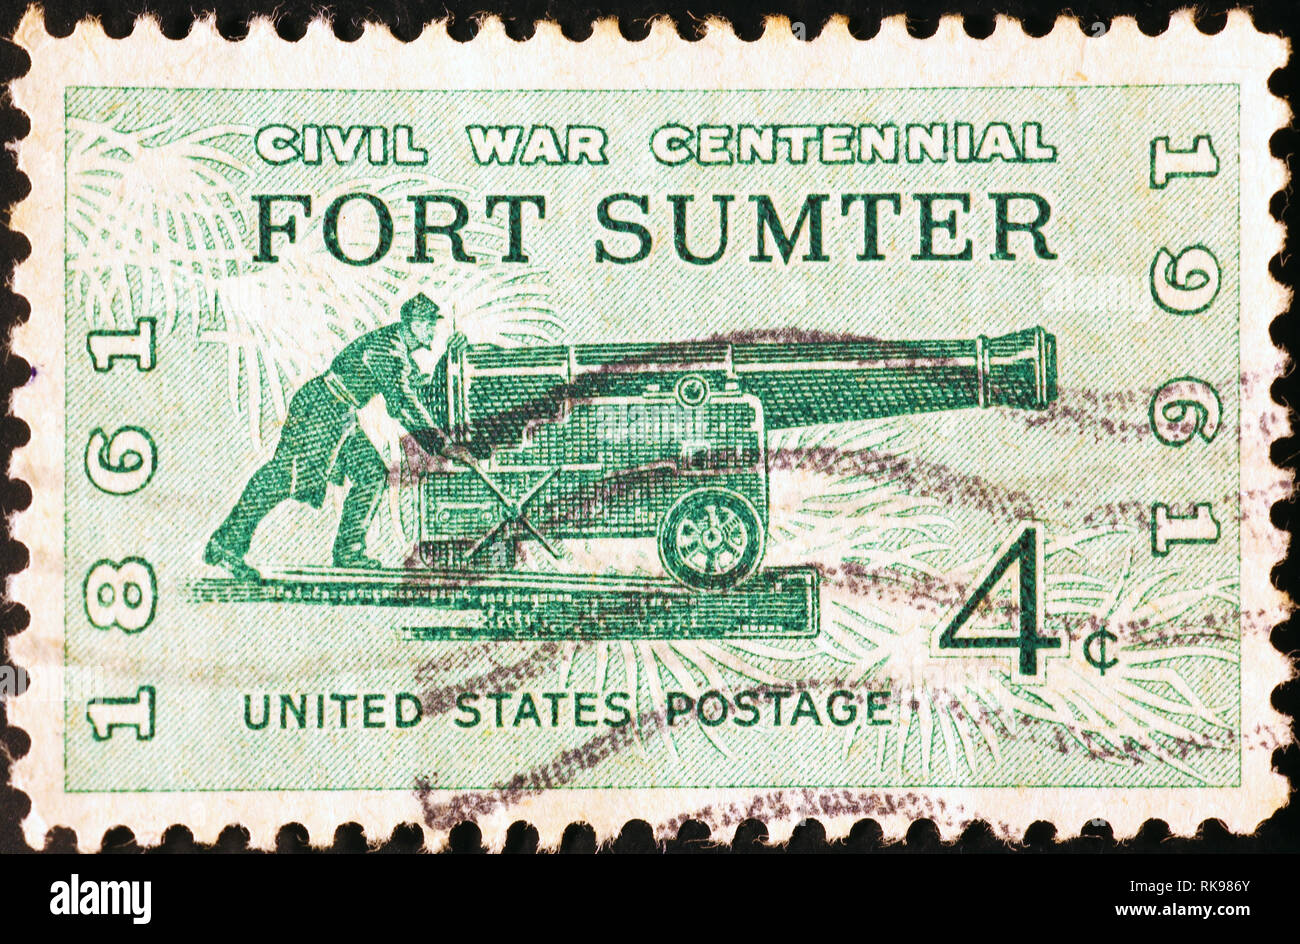 Big cannon of Fort Sumter on vintage american stamp Stock Photo